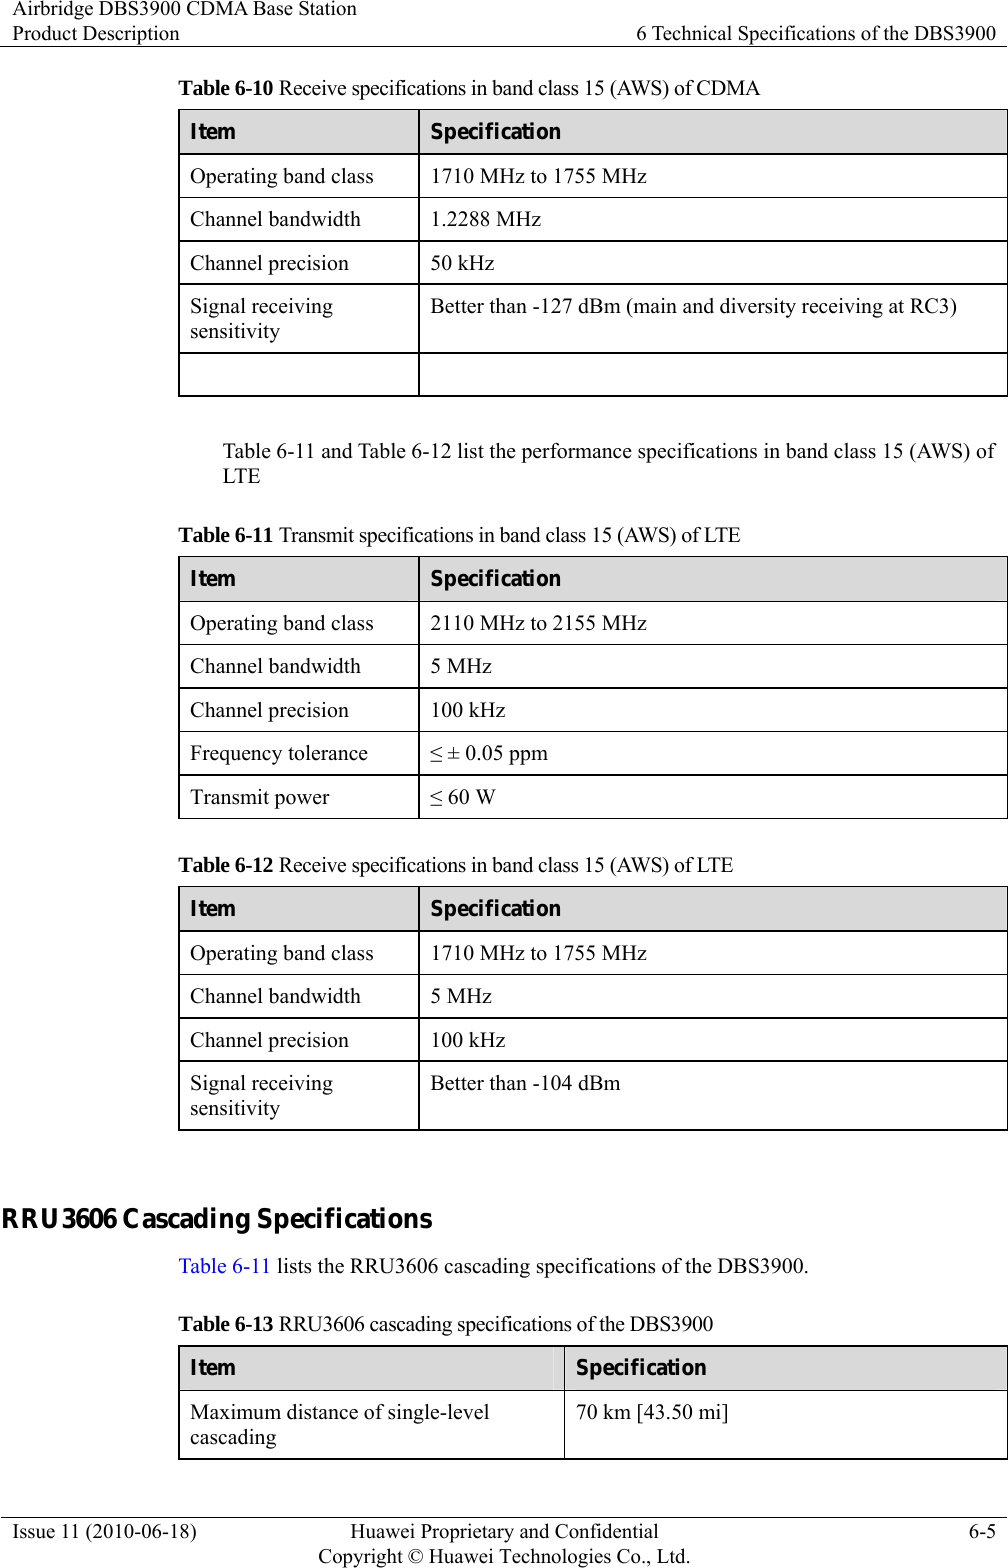 Airbridge DBS3900 CDMA Base Station Product Description  6 Technical Specifications of the DBS3900 Issue 11 (2010-06-18)  Huawei Proprietary and Confidential         Copyright © Huawei Technologies Co., Ltd.6-5 Table 6-10 Receive specifications in band class 15 (AWS) of CDMA Item  Specification Operating band class  1710 MHz to 1755 MHz Channel bandwidth  1.2288 MHz Channel precision  50 kHz Signal receiving sensitivity Better than -127 dBm (main and diversity receiving at RC3)    Table 6-11 and Table 6-12 list the performance specifications in band class 15 (AWS) of LTE Table 6-11 Transmit specifications in band class 15 (AWS) of LTE Item  Specification Operating band class  2110 MHz to 2155 MHz Channel bandwidth  5 MHz Channel precision  100 kHz Frequency tolerance  ≤ ± 0.05 ppm Transmit power  ≤ 60 W Table 6-12 Receive specifications in band class 15 (AWS) of LTE Item  Specification Operating band class  1710 MHz to 1755 MHz Channel bandwidth  5 MHz Channel precision  100 kHz Signal receiving sensitivity Better than -104 dBm  RRU3606 Cascading Specifications Table 6-11 lists the RRU3606 cascading specifications of the DBS3900. Table 6-13 RRU3606 cascading specifications of the DBS3900 Item  Specification Maximum distance of single-level cascading 70 km [43.50 mi] 